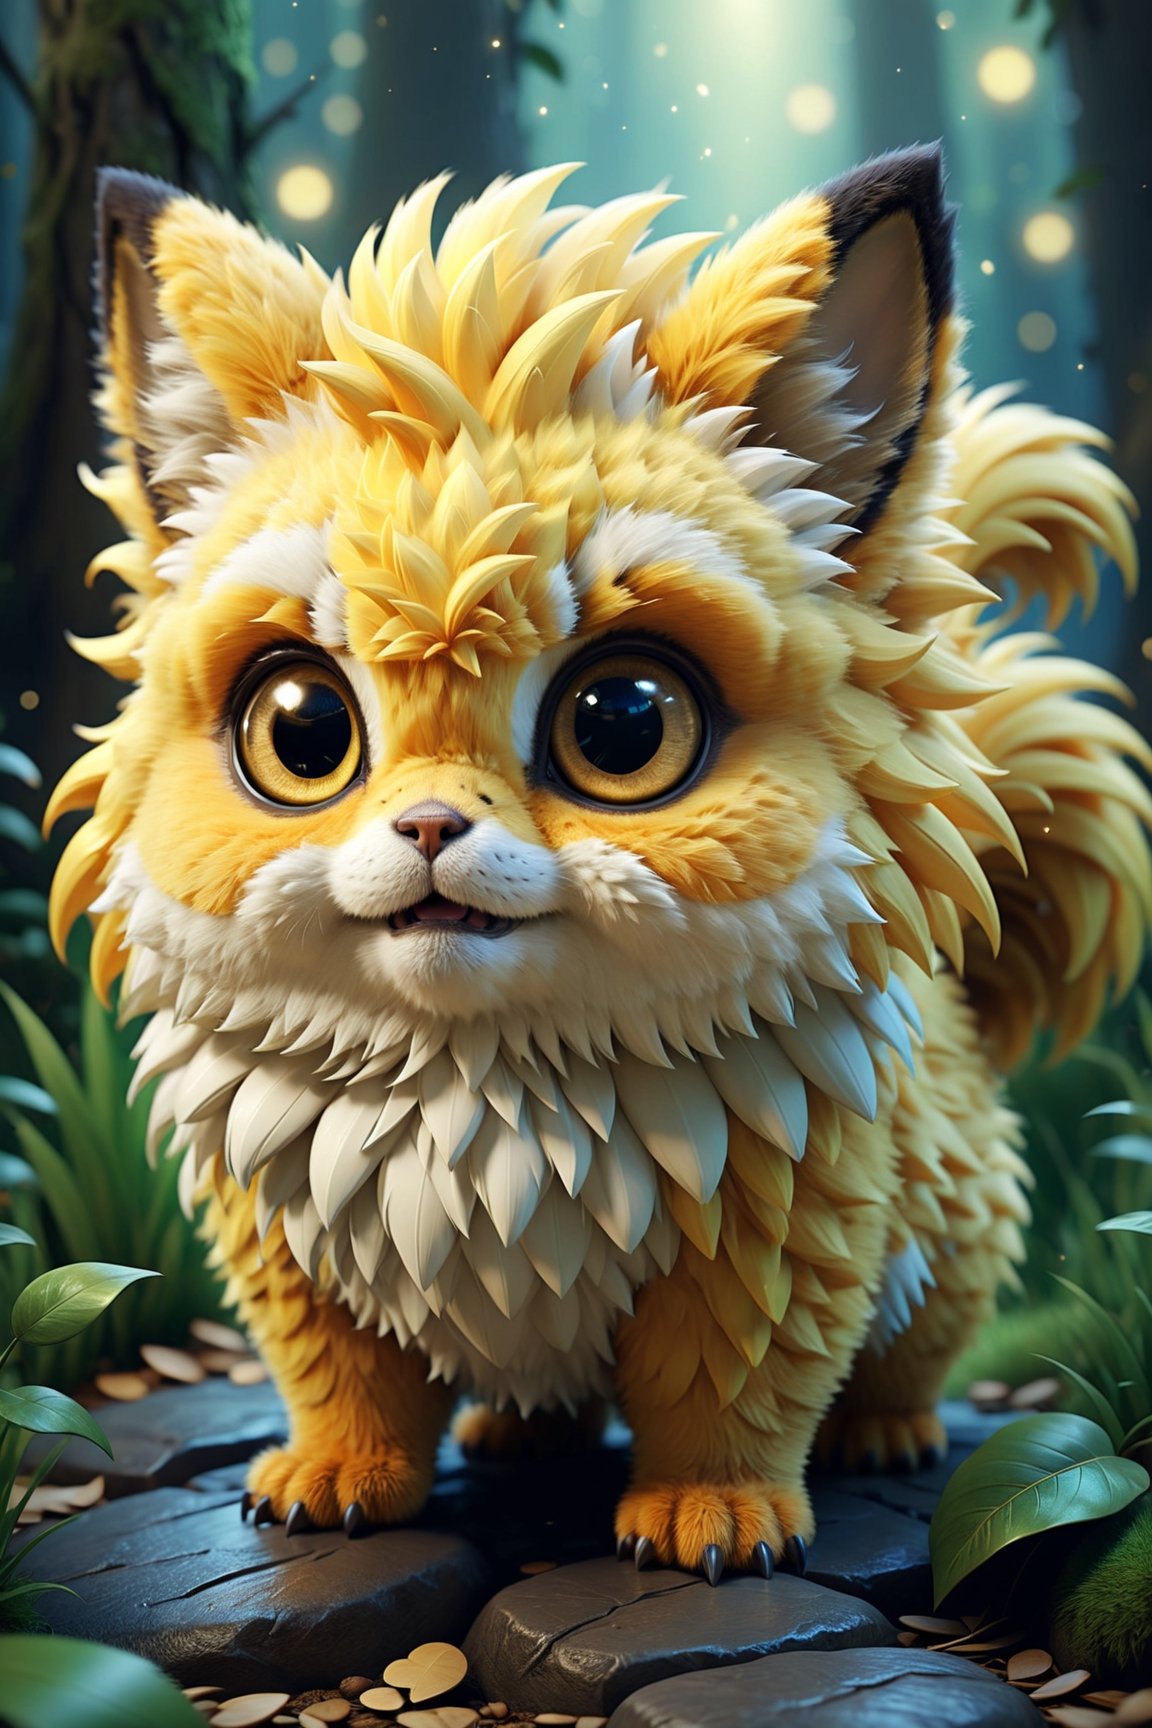 most cute fantasy animals of the world, different species, pikachu based, big eyes, very fluffy
